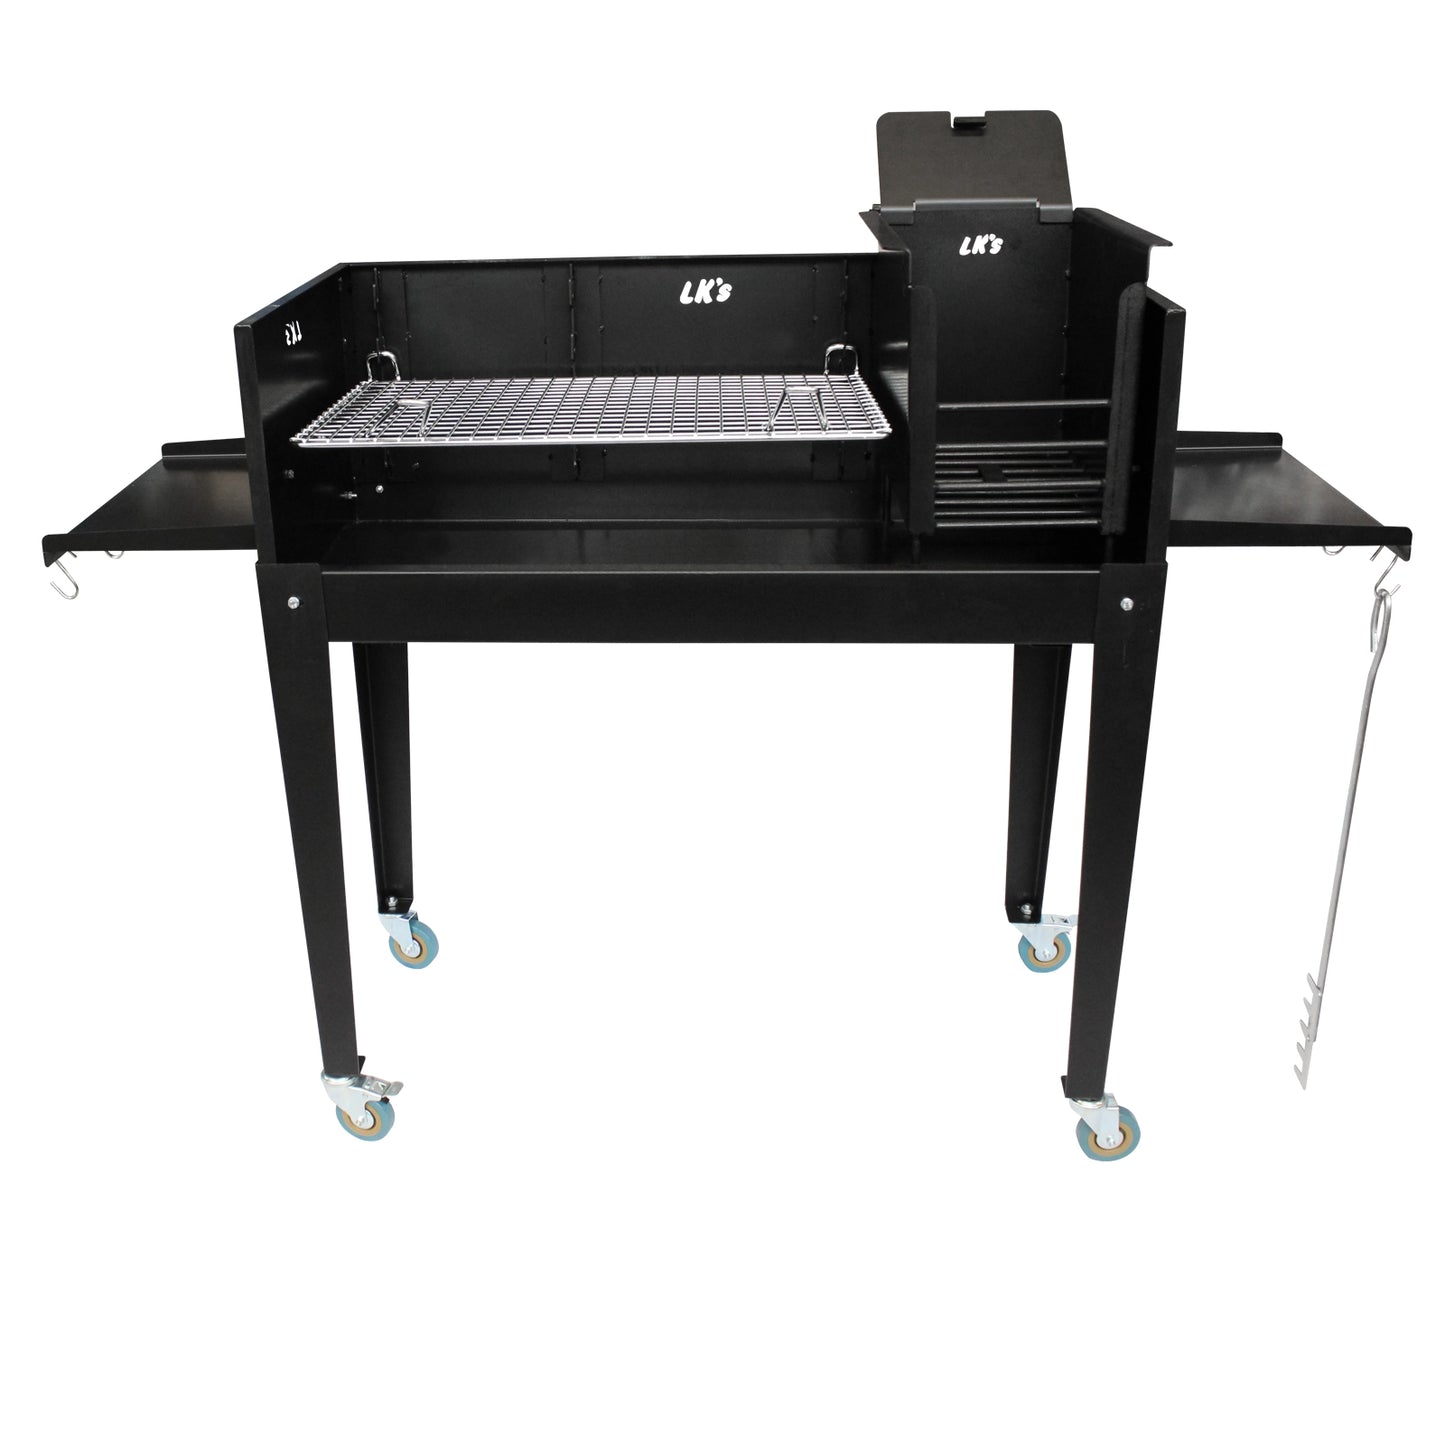 Entertainer braai large outdoor charcoal barbecue